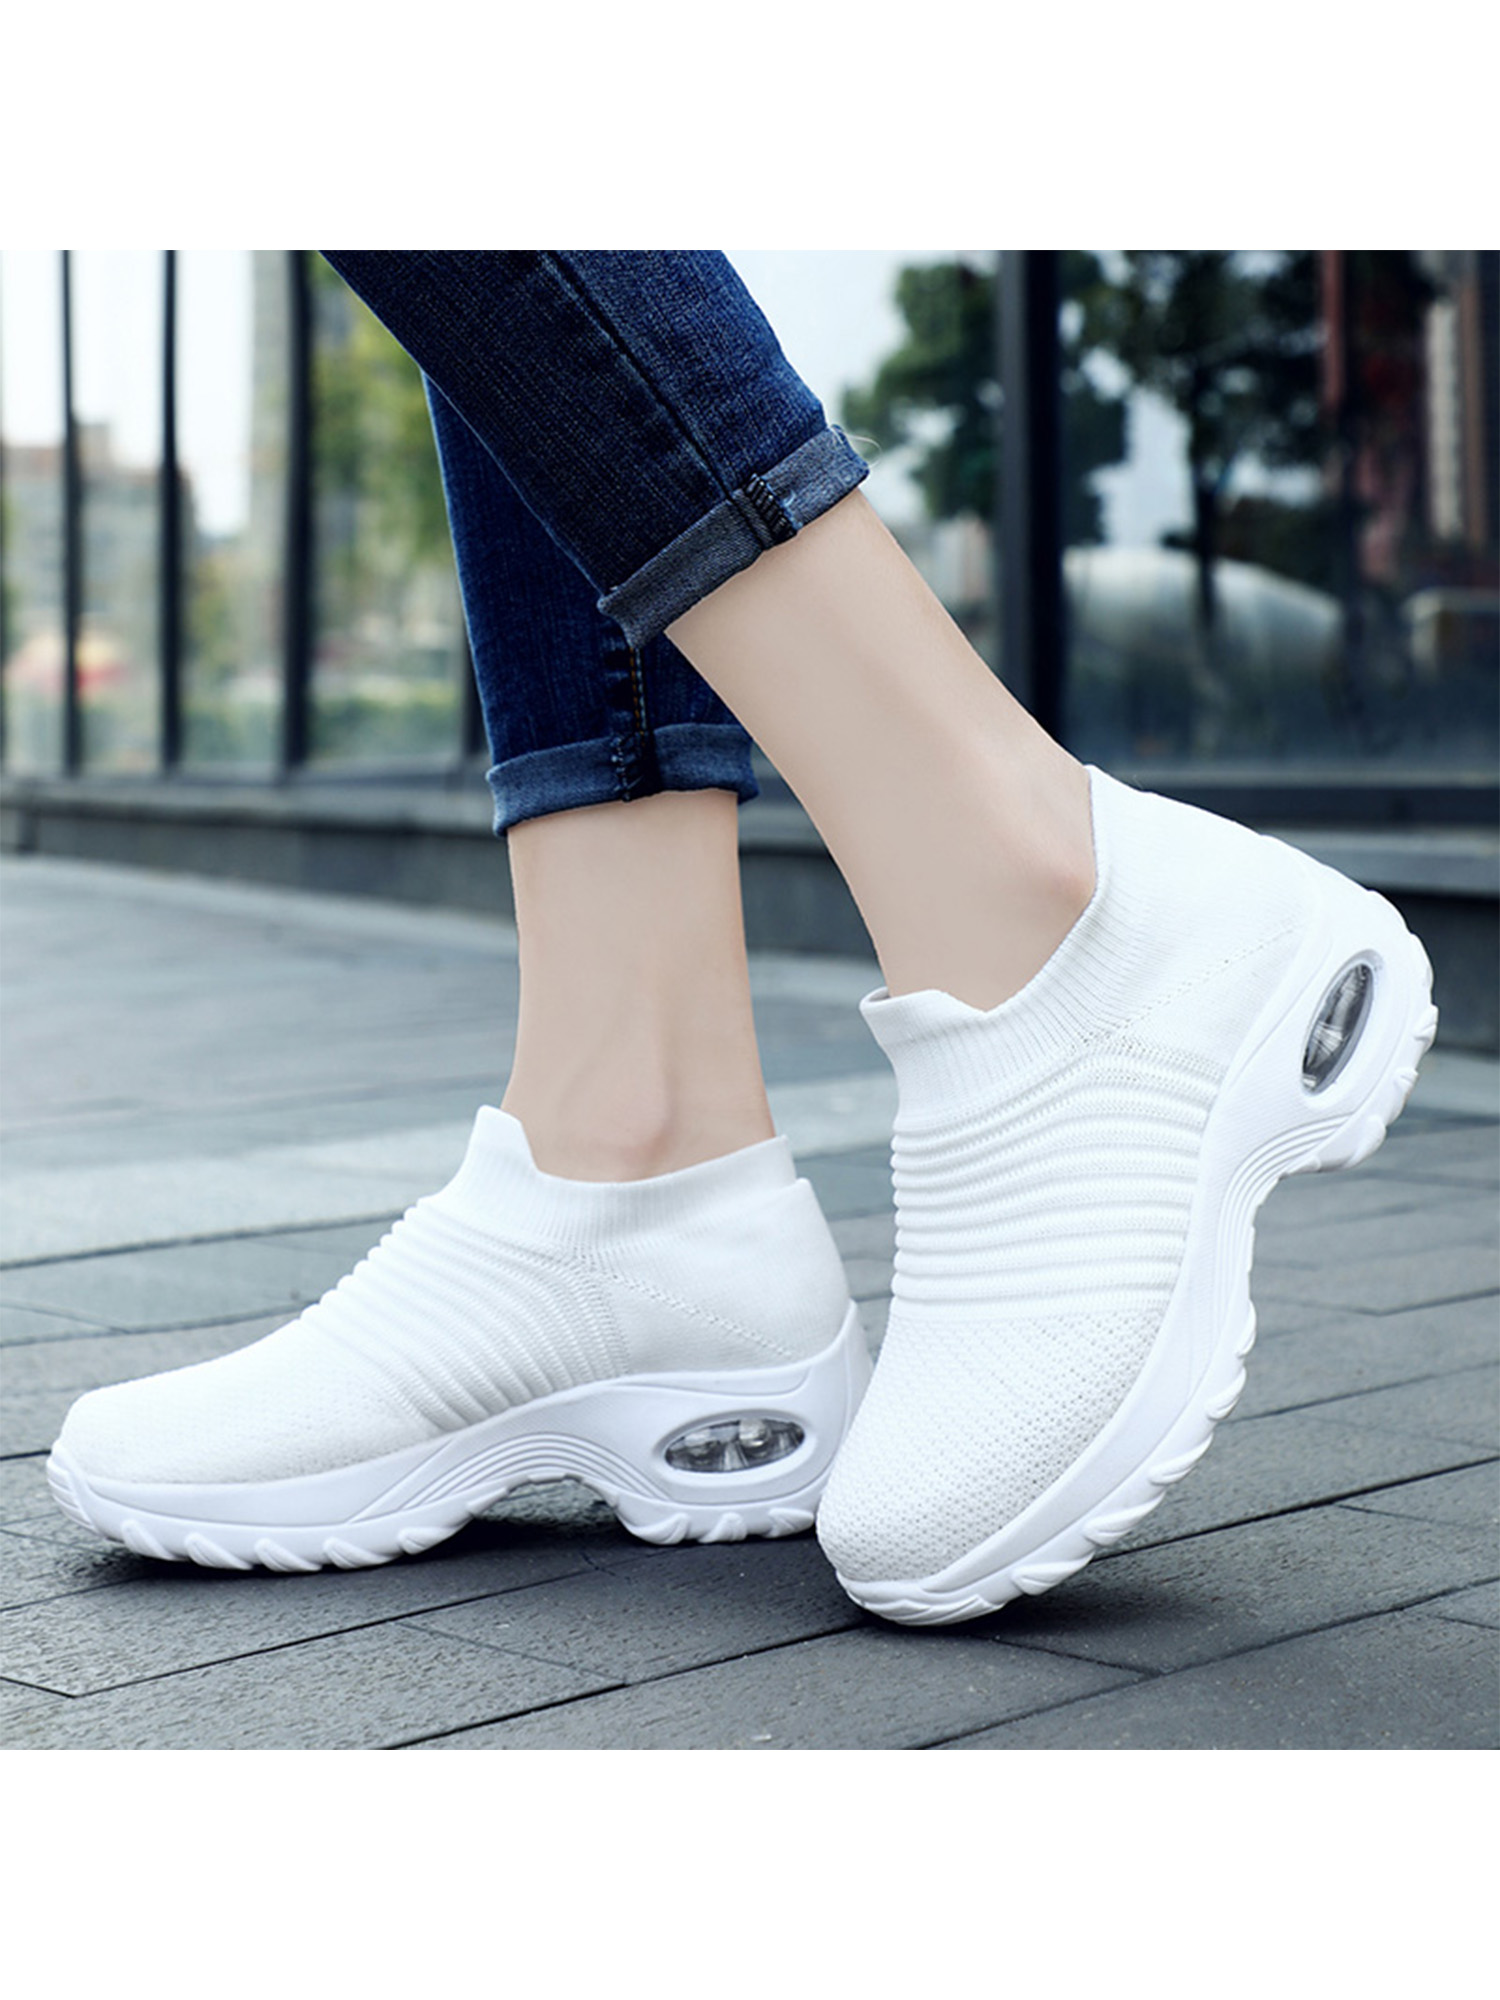 Woobling Womens Air Cushion Sneakers Trainers Running Comfy Breathable Gym Sock Shoes - image 4 of 5